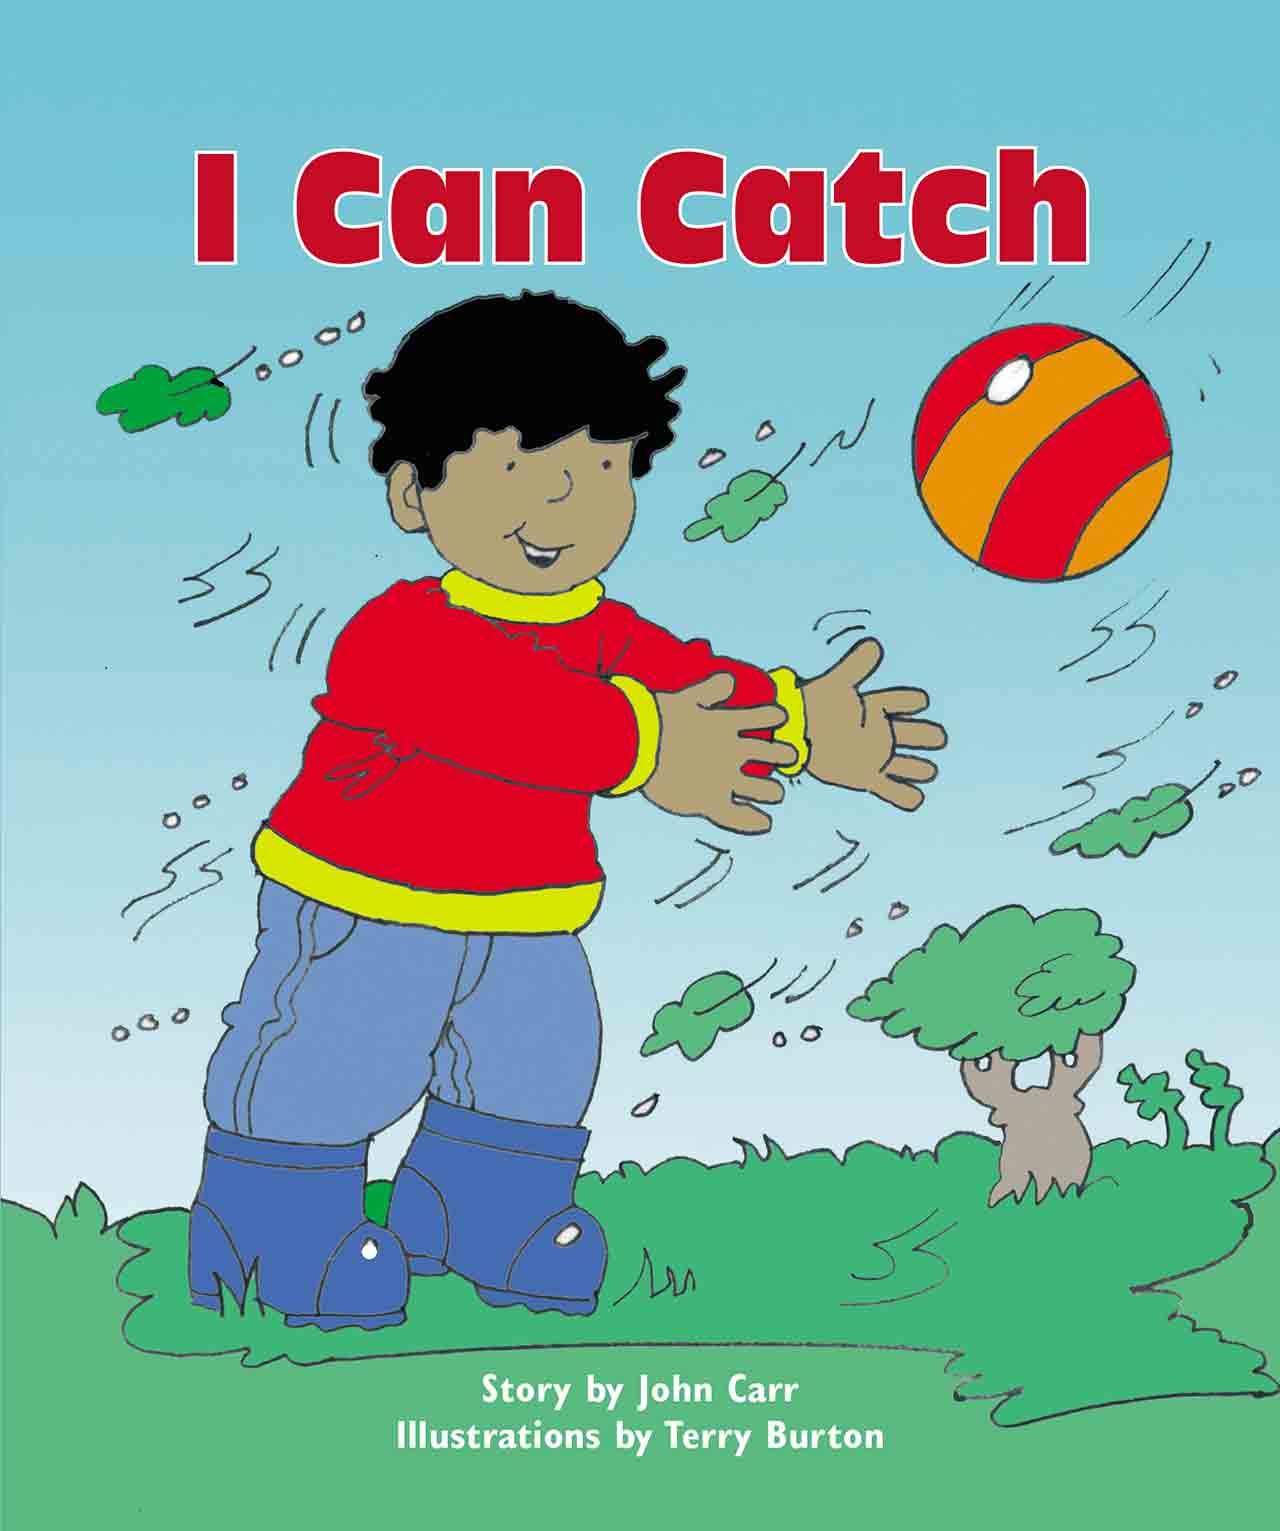 He can catch. Catch can. To catch. We can catch. Catch Flashcard.